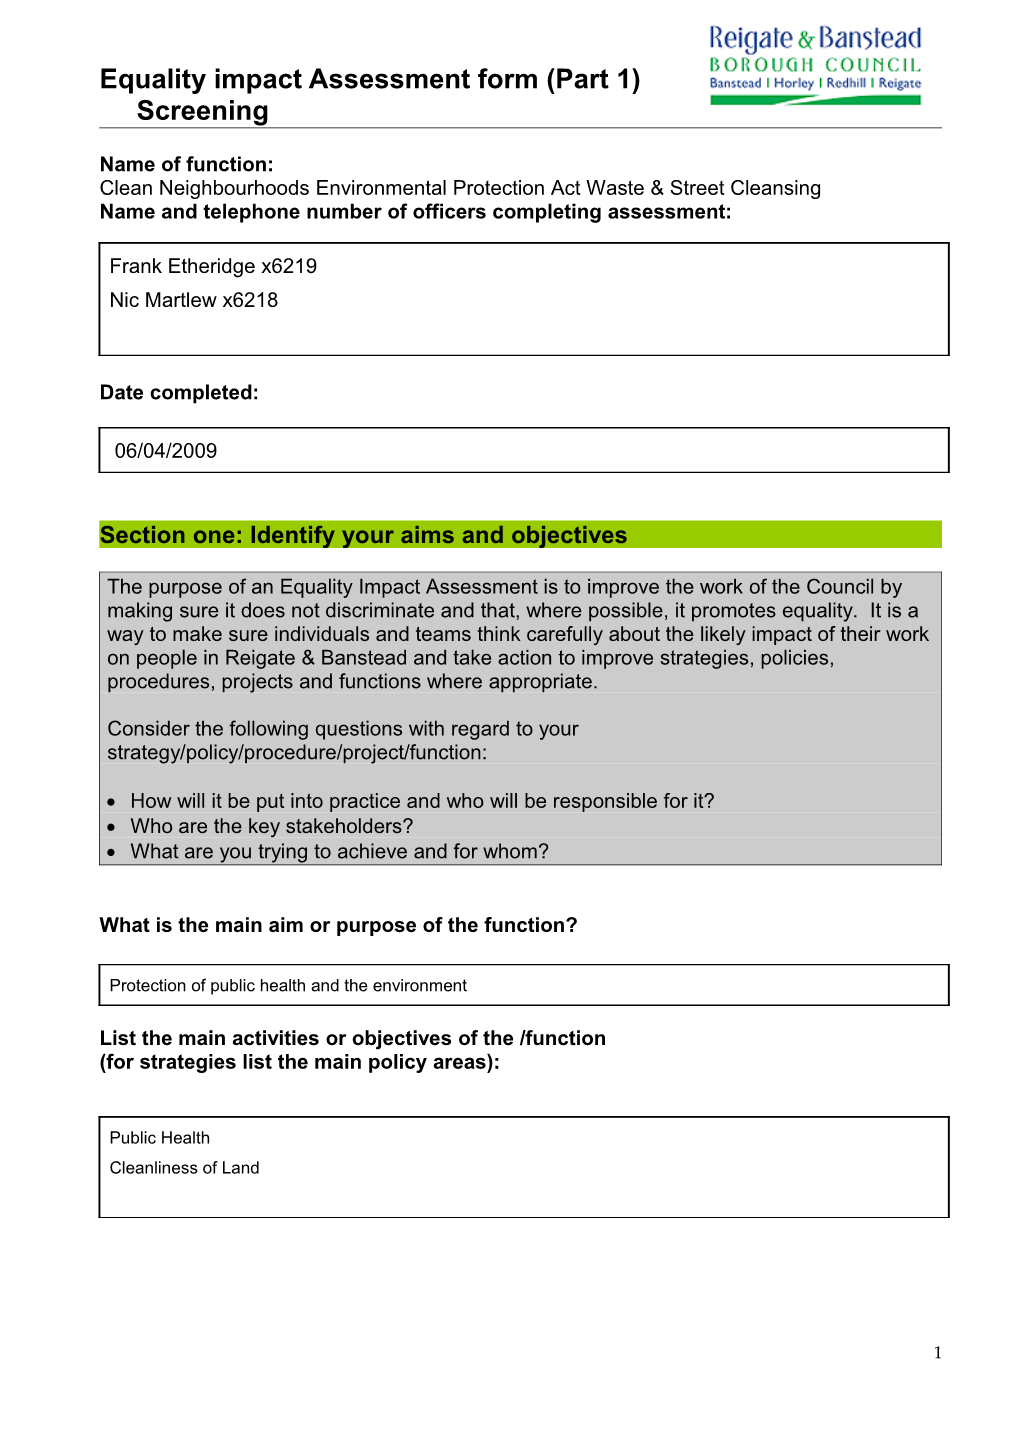 Equality Impact Assessment Form (Part 1)